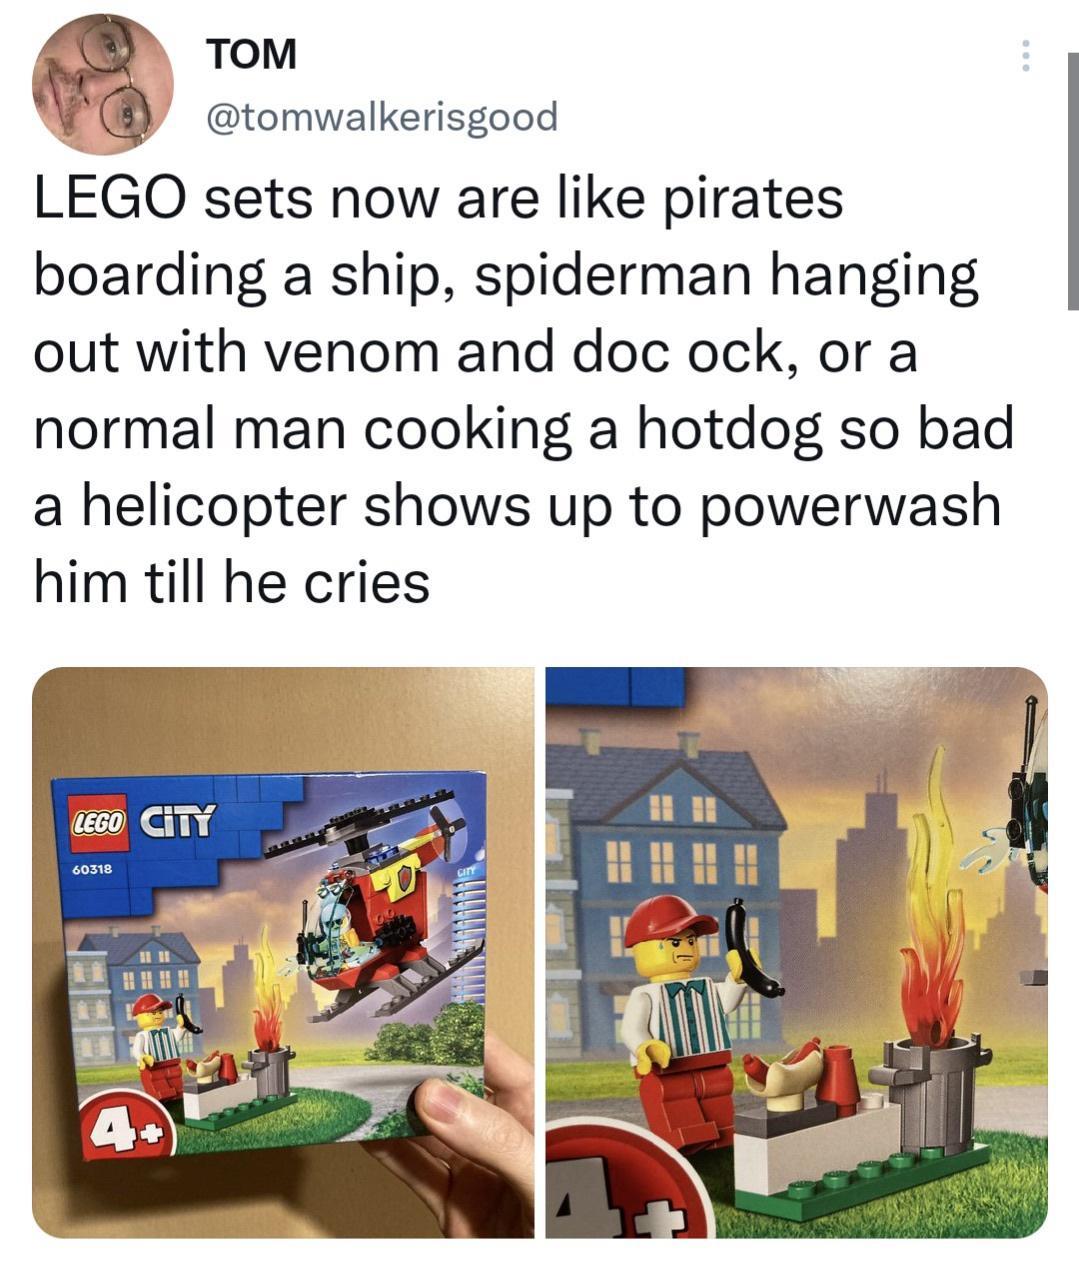 daily dose of randoms - quotes - Lego sets now are pirates boarding a ship, spiderman hanging out with venom and doc ock, or a normal man cooking a hotdog so bad a helicopter shows up to powerwash him till he cries Lego City 60318 09 L